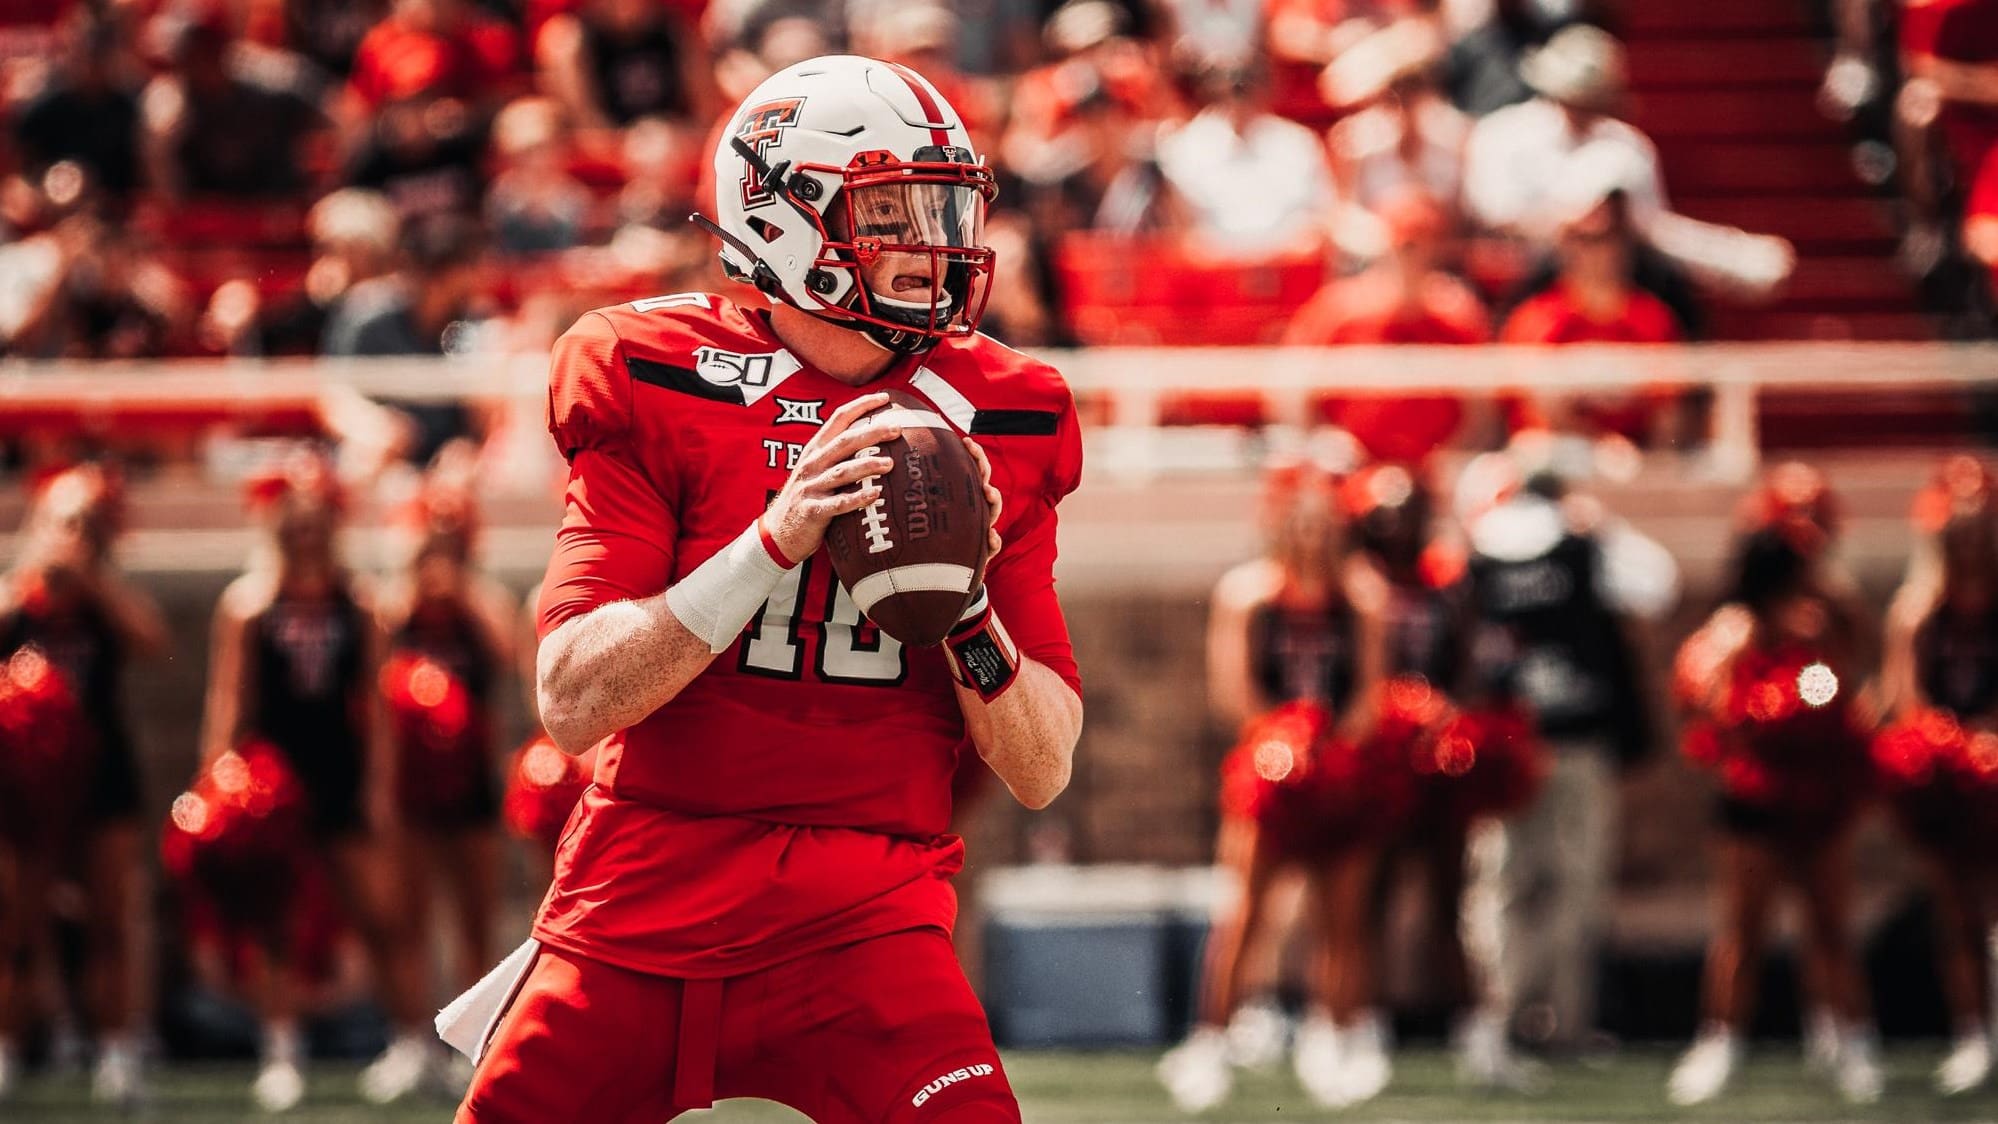 Big 12 Preview Series Texas Tech Needs Bowman To Stay Healthy This Season Wv Sports Now